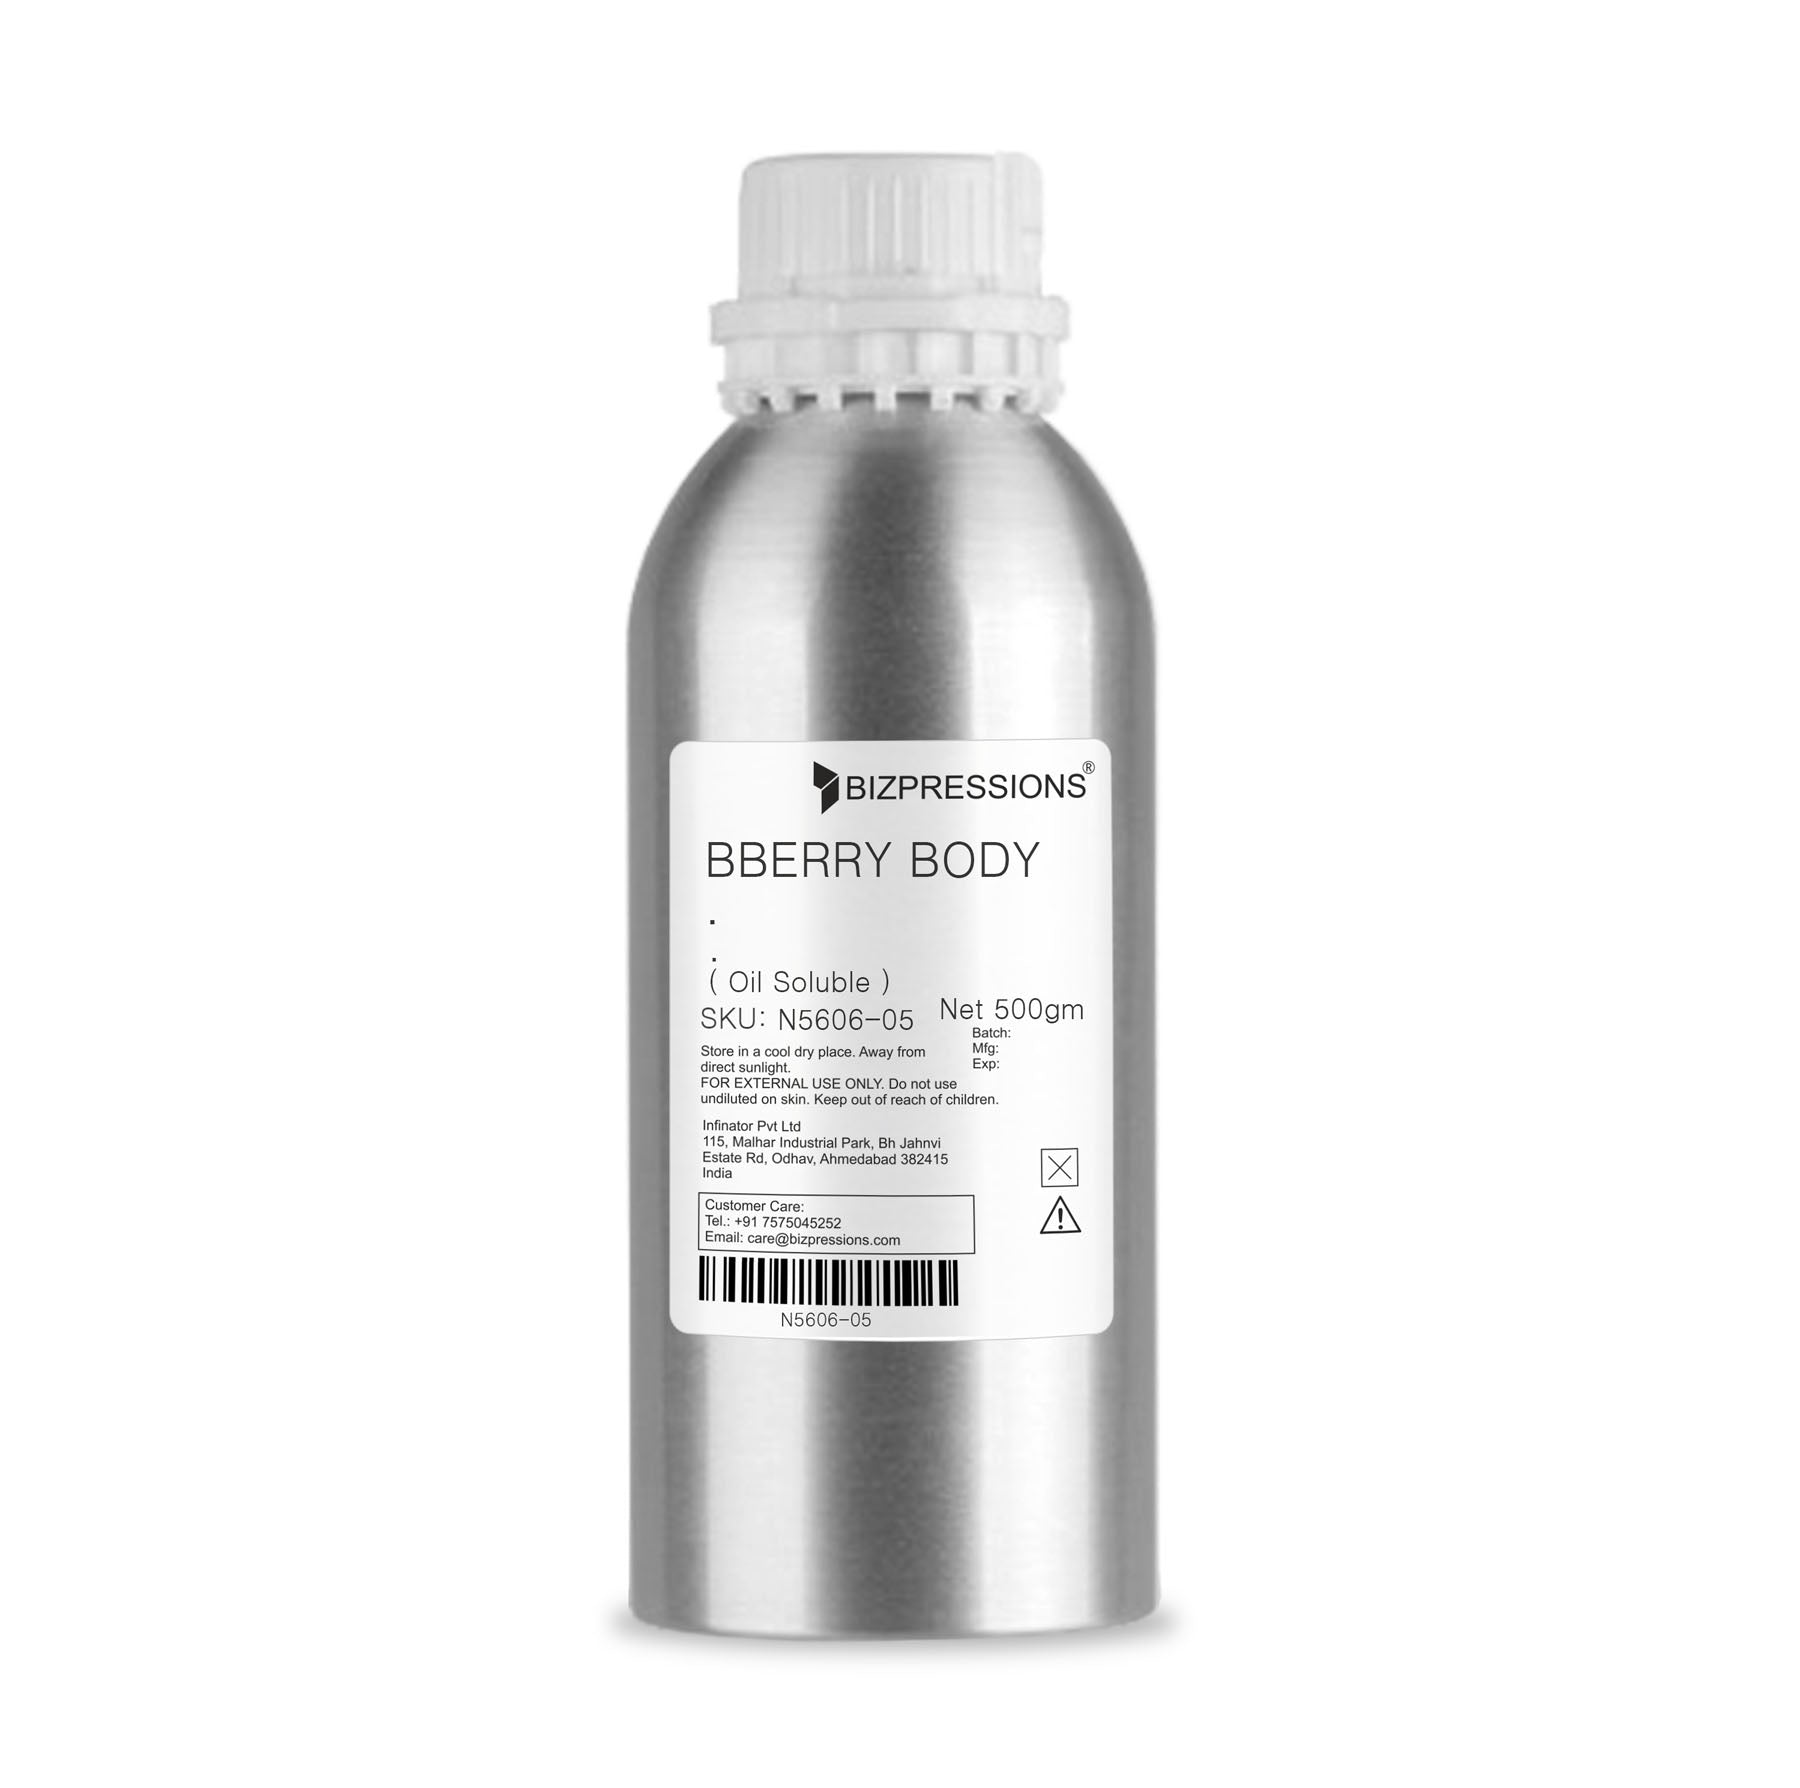 BBERRY BODY - Fragrance ( Oil Soluble ) - 500 gm